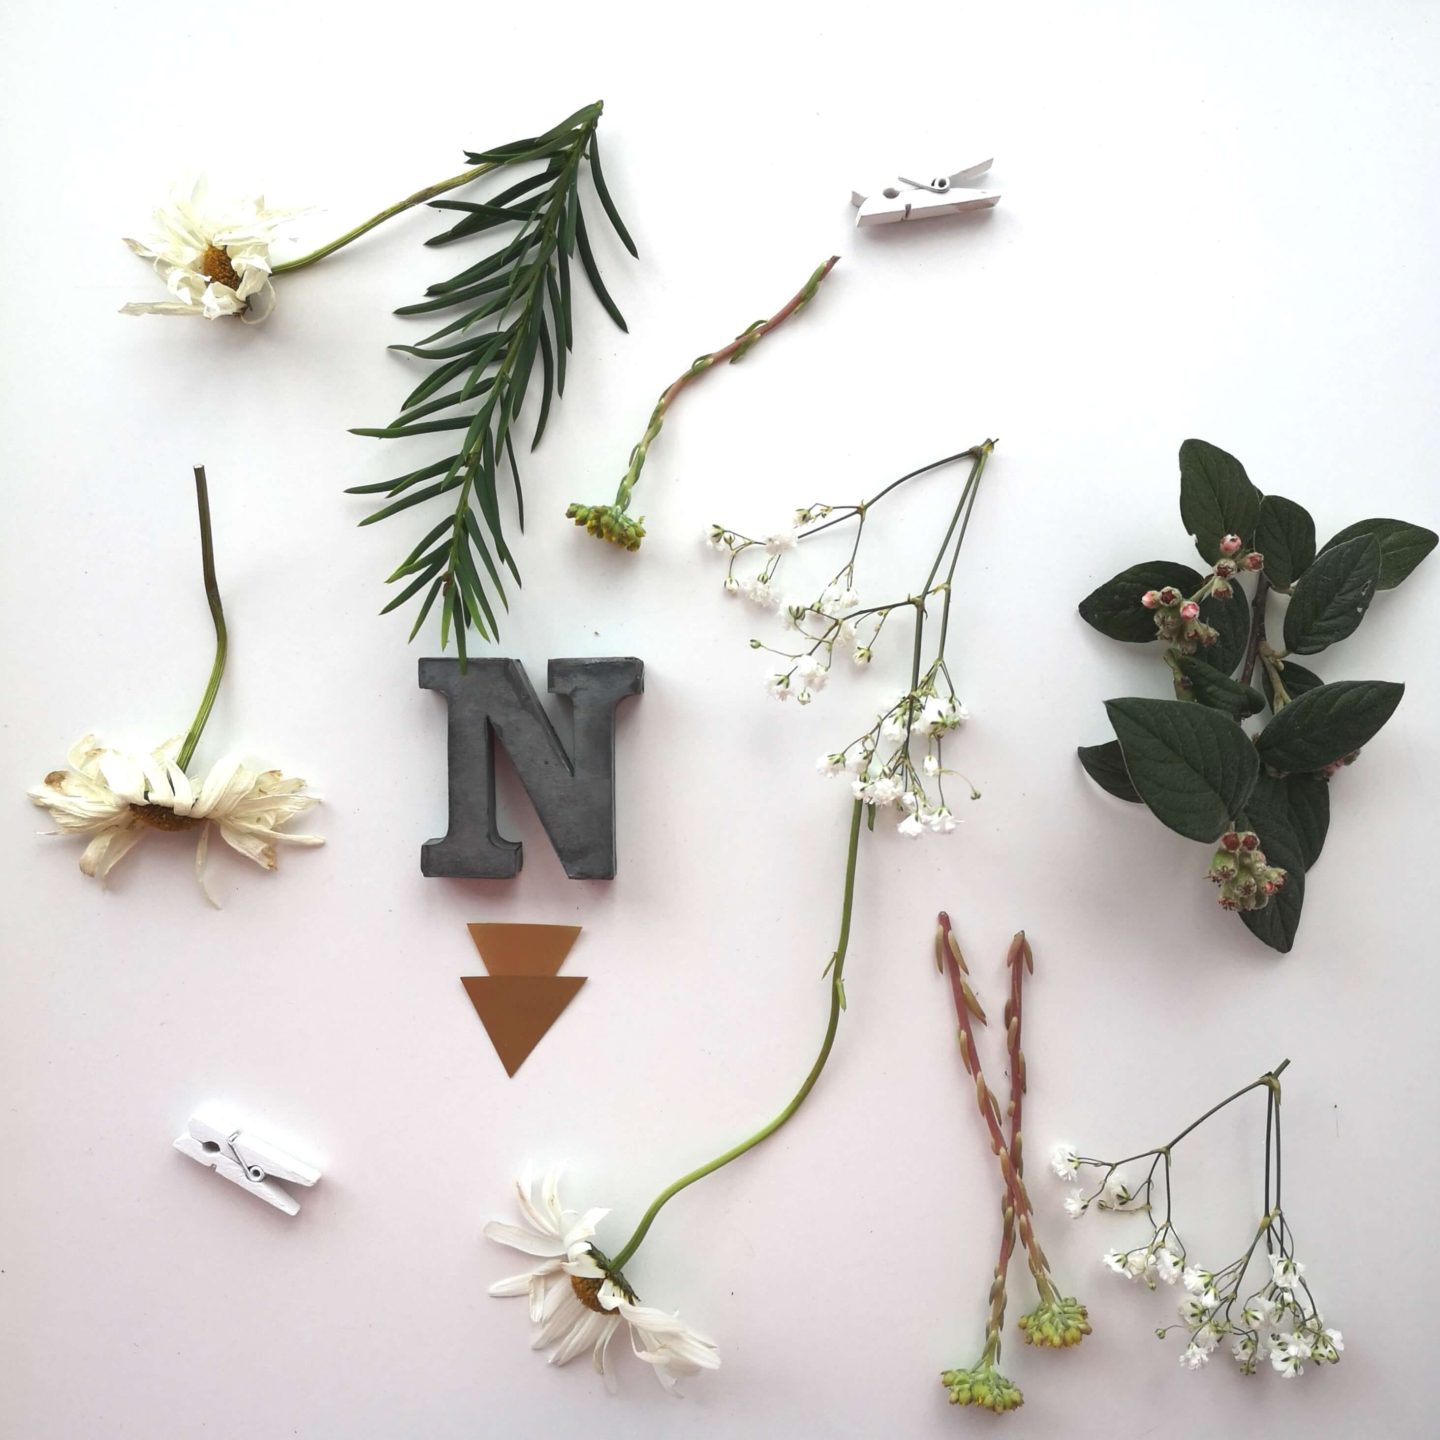 Flatlay of daisies, leaves, white little pegs, gold triangular decals and metal letters.